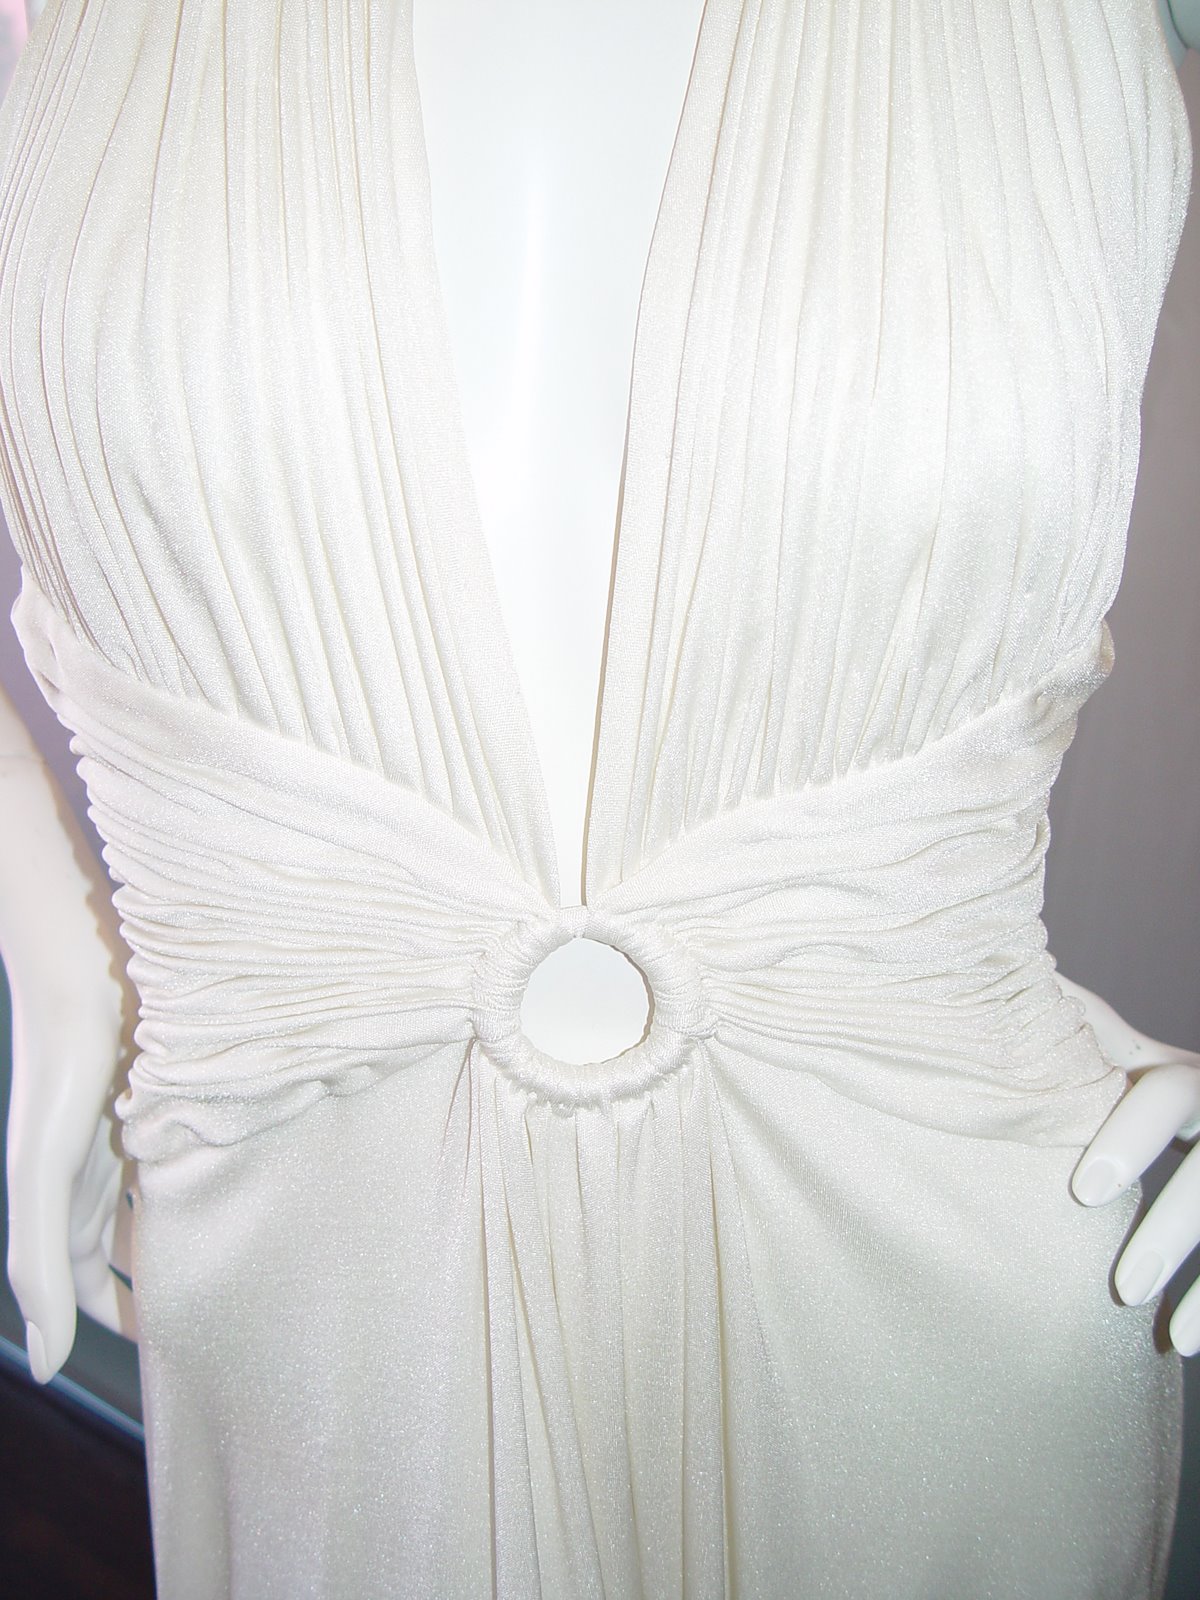 [LORIS+AZZARO+WHITE+JERSEY+PLEATED+HALTER+DRESS+WITH+ICONIC+RING+DEATIL+C+70S+SIZE+6.JPG+(1).JPG]